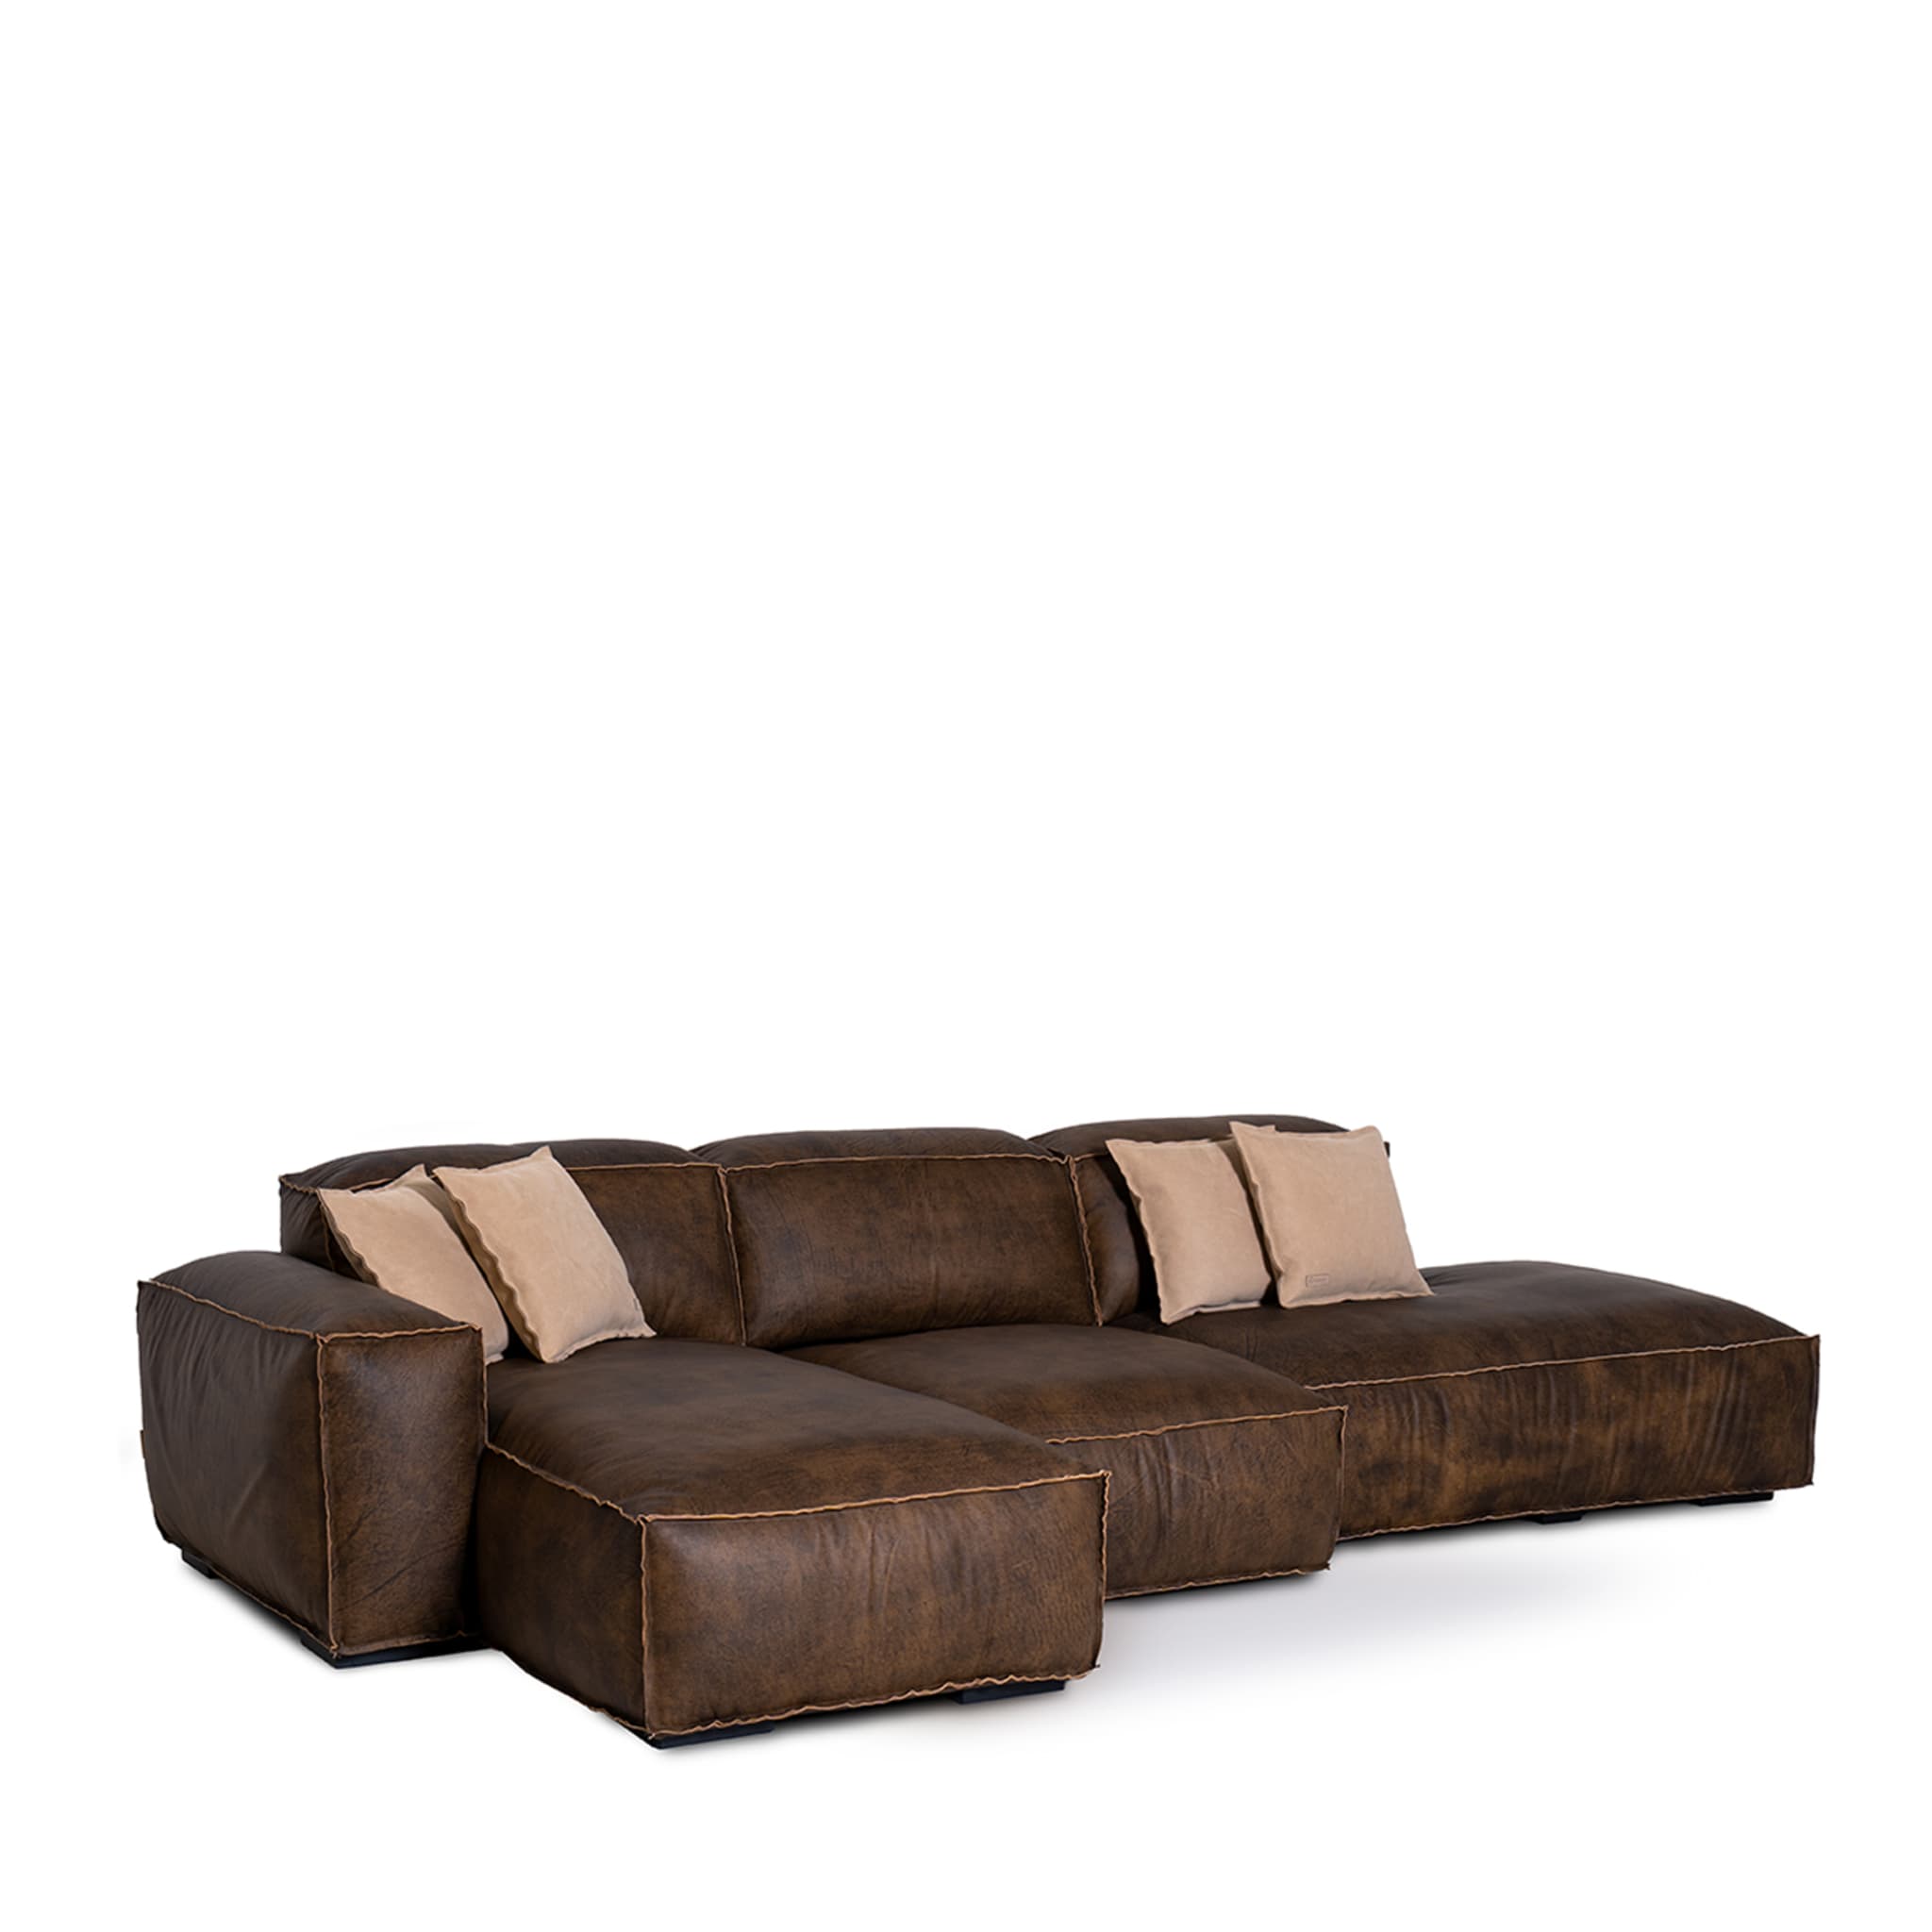 Placido Sofa with Chaise Longue and Free Side - Alternative view 1